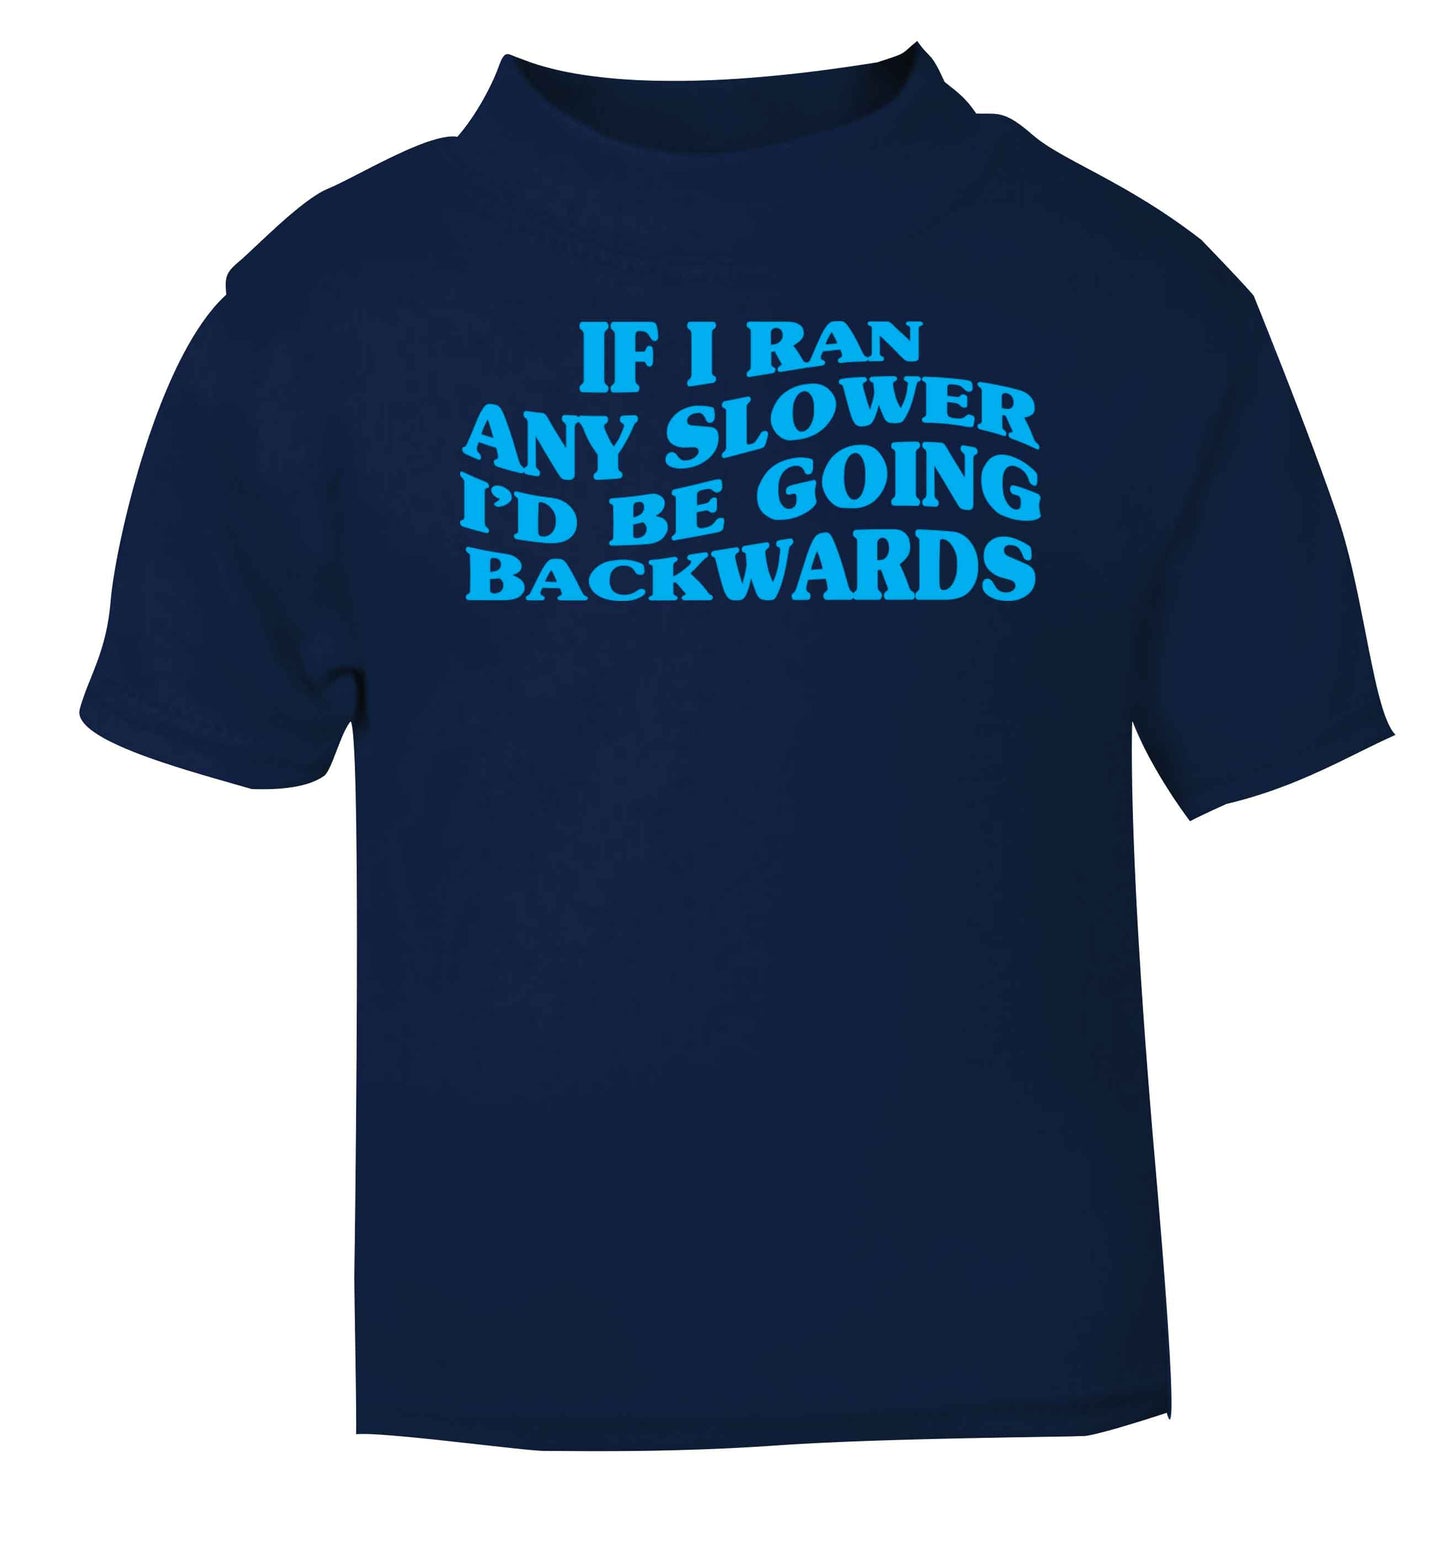 If I ran any slower I'd be going backwards navy baby toddler Tshirt 2 Years